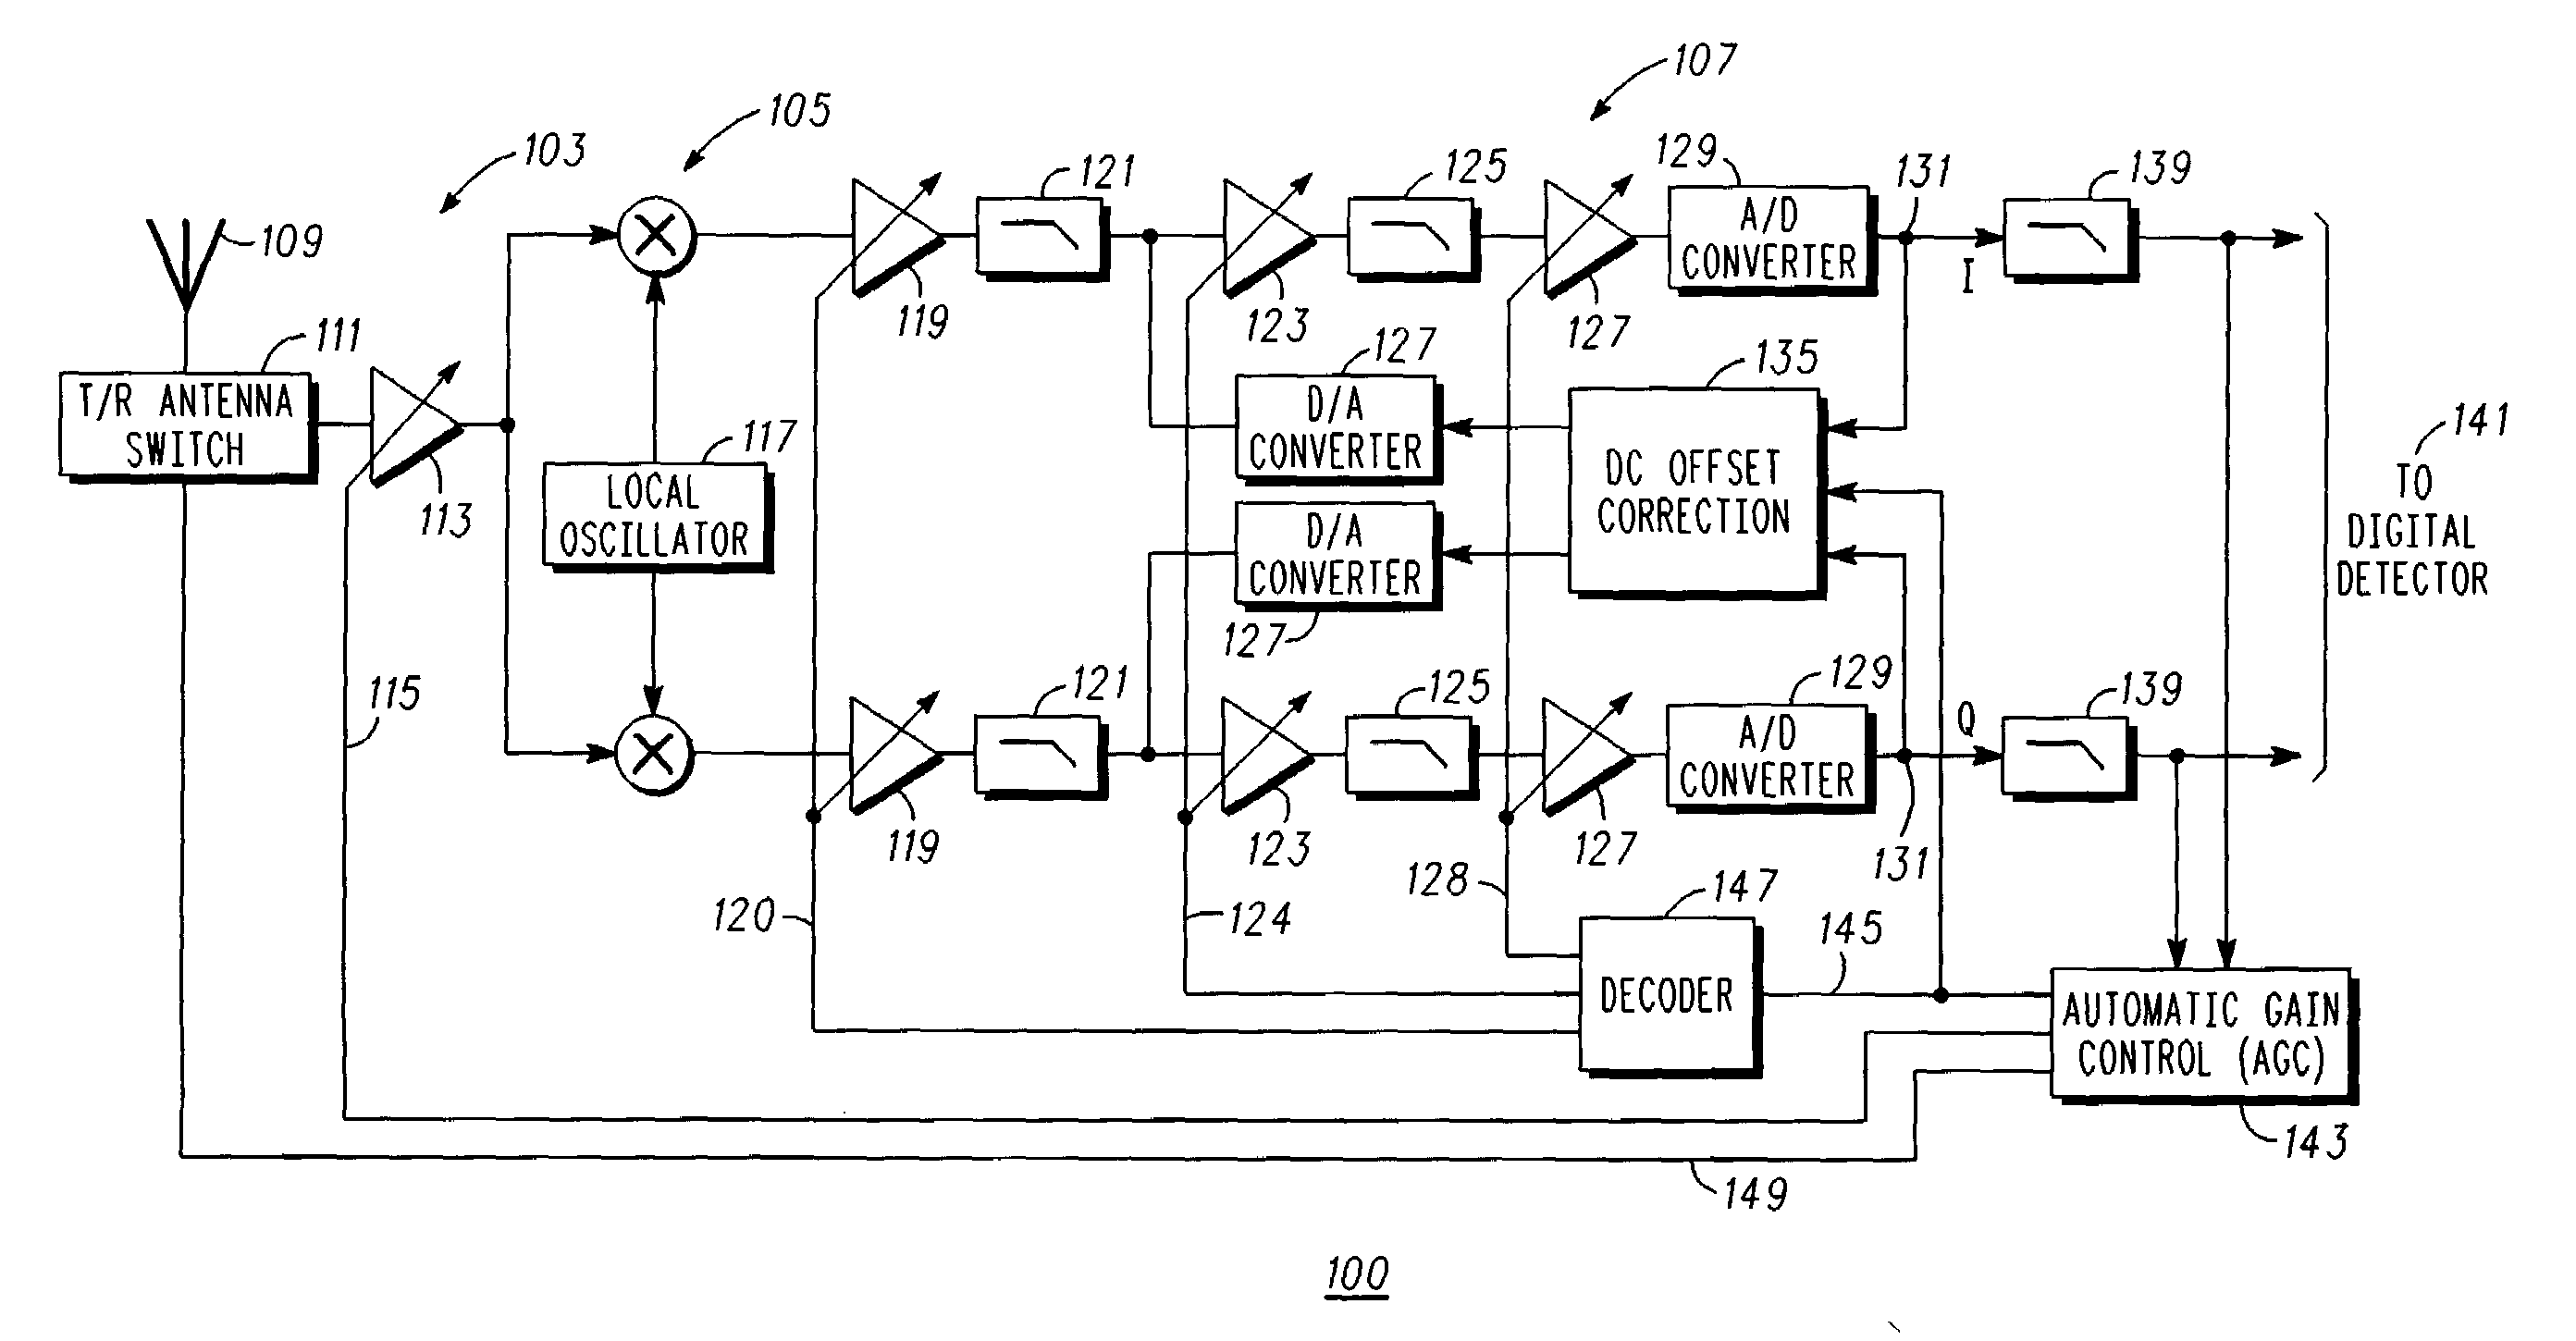 DC offset correction for direct conversion receivers